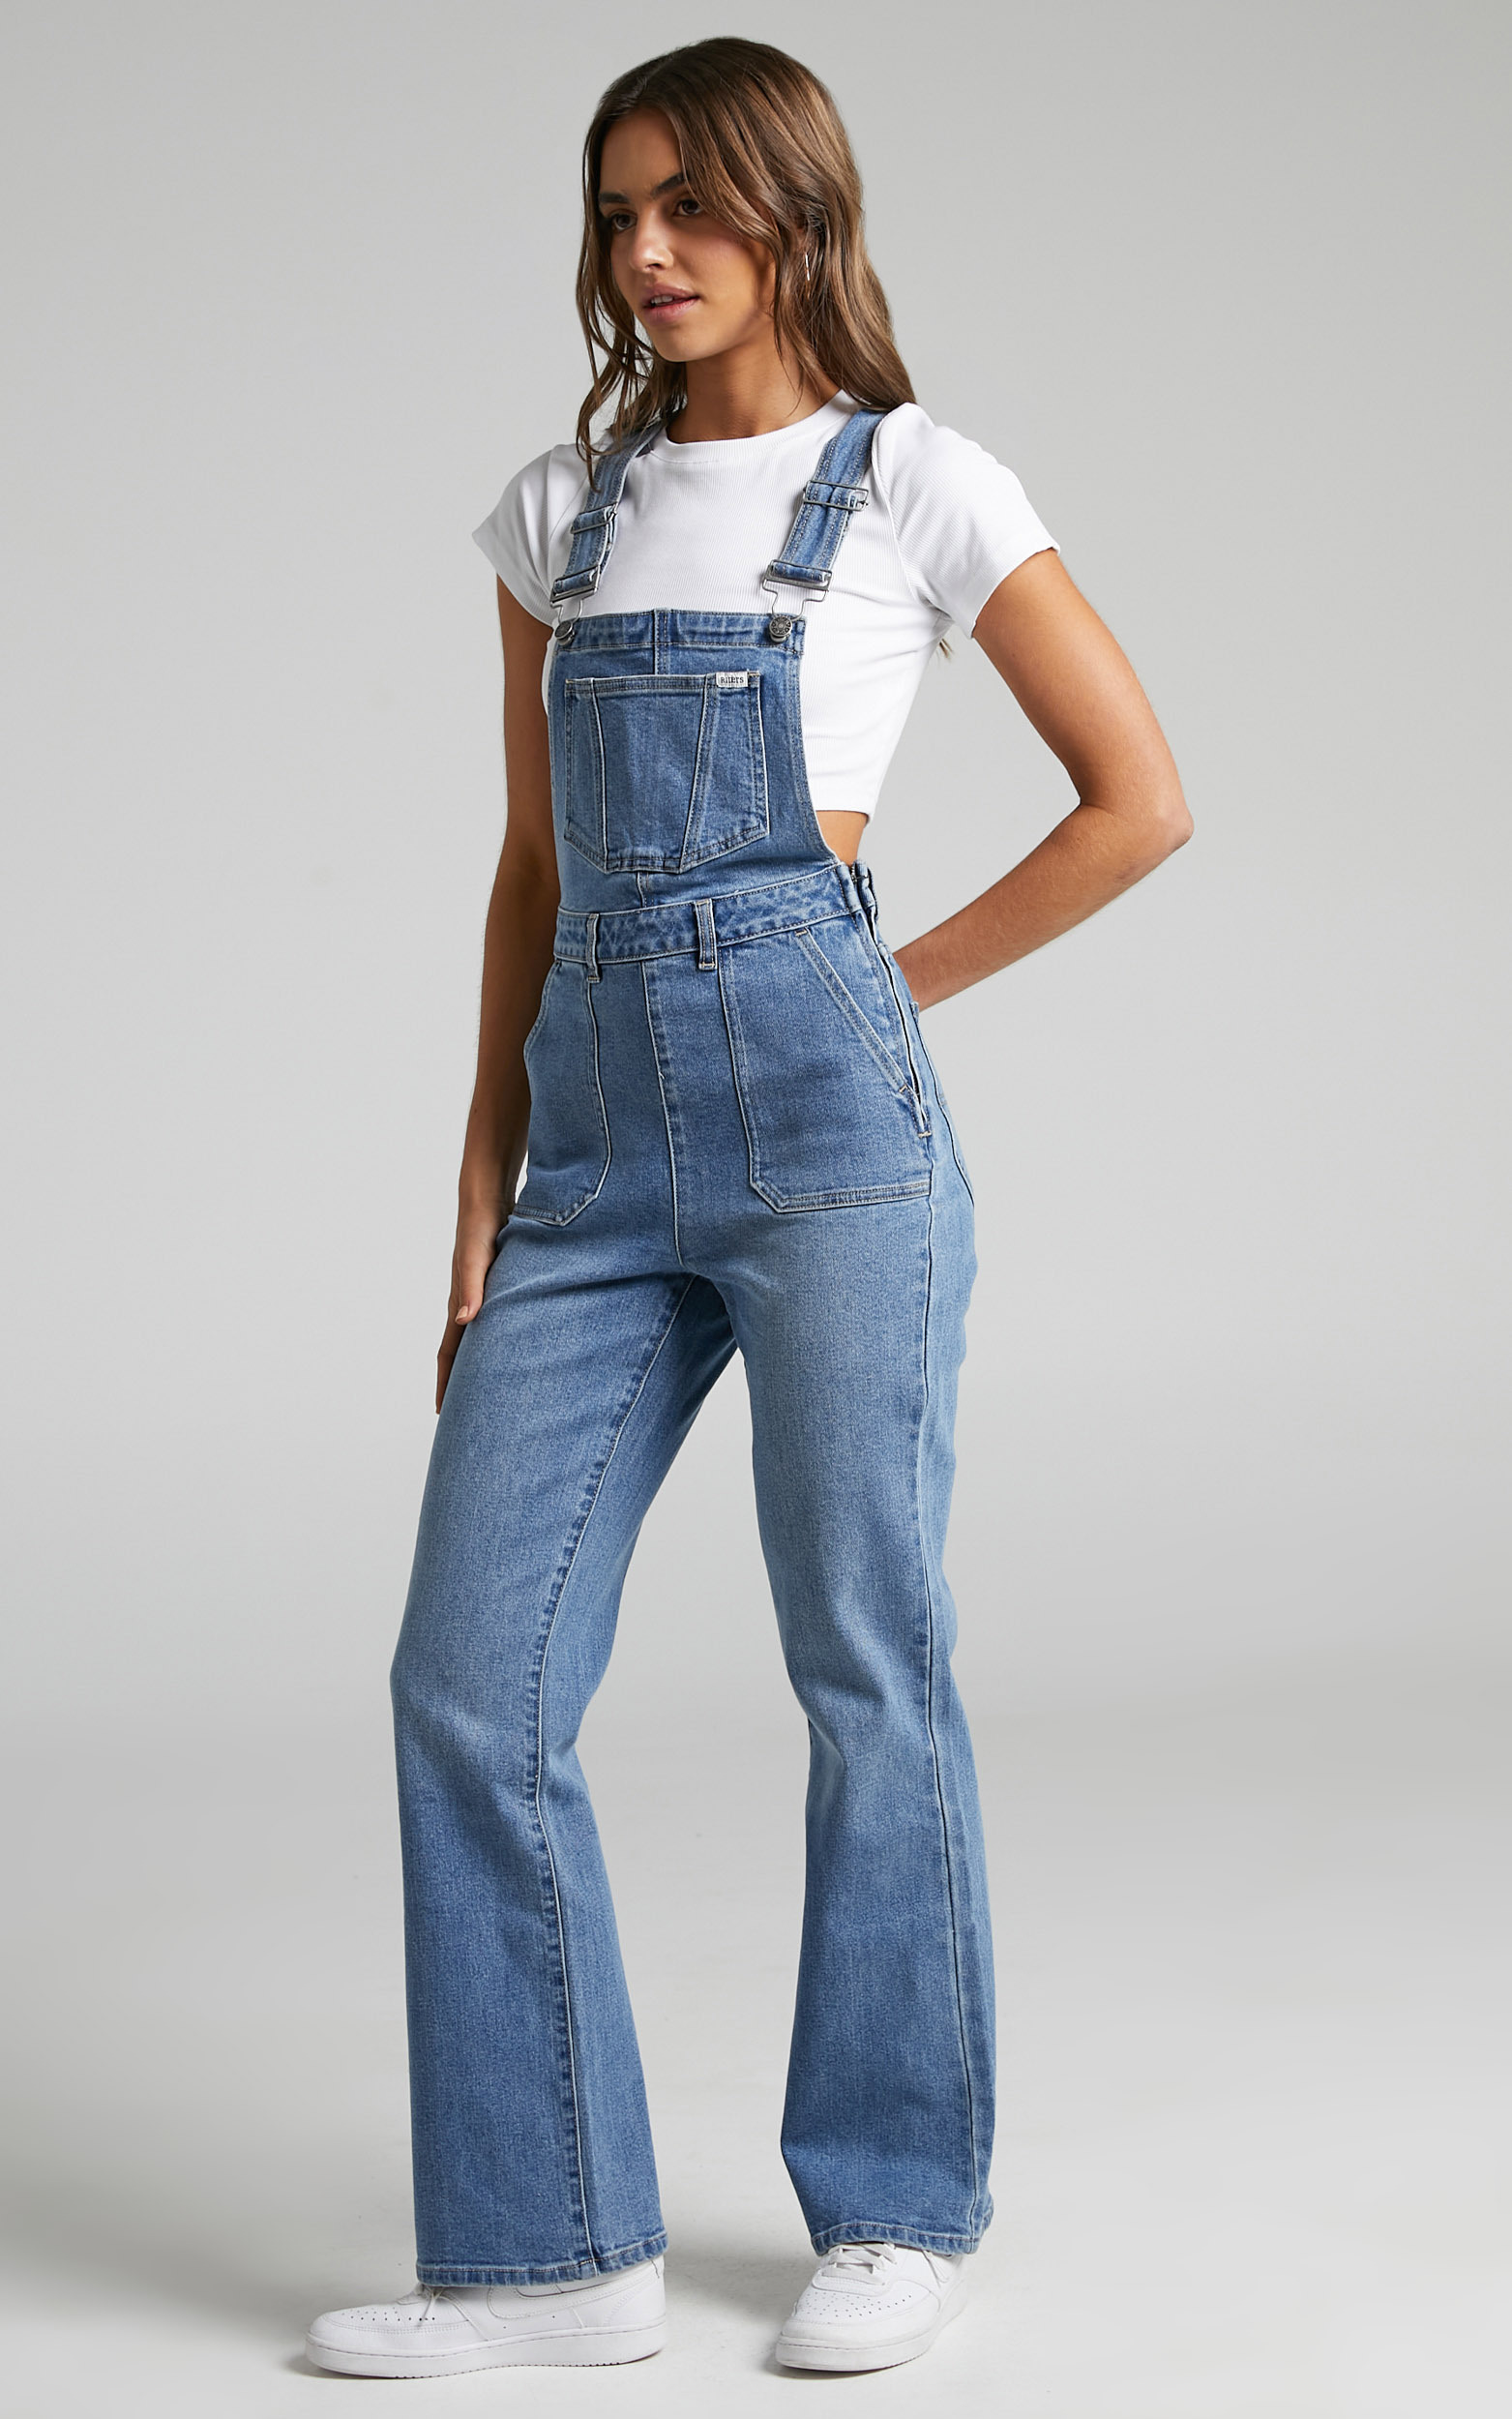 Riders by Lee - Tori Denim Overall in Blue Viewpoint | Showpo